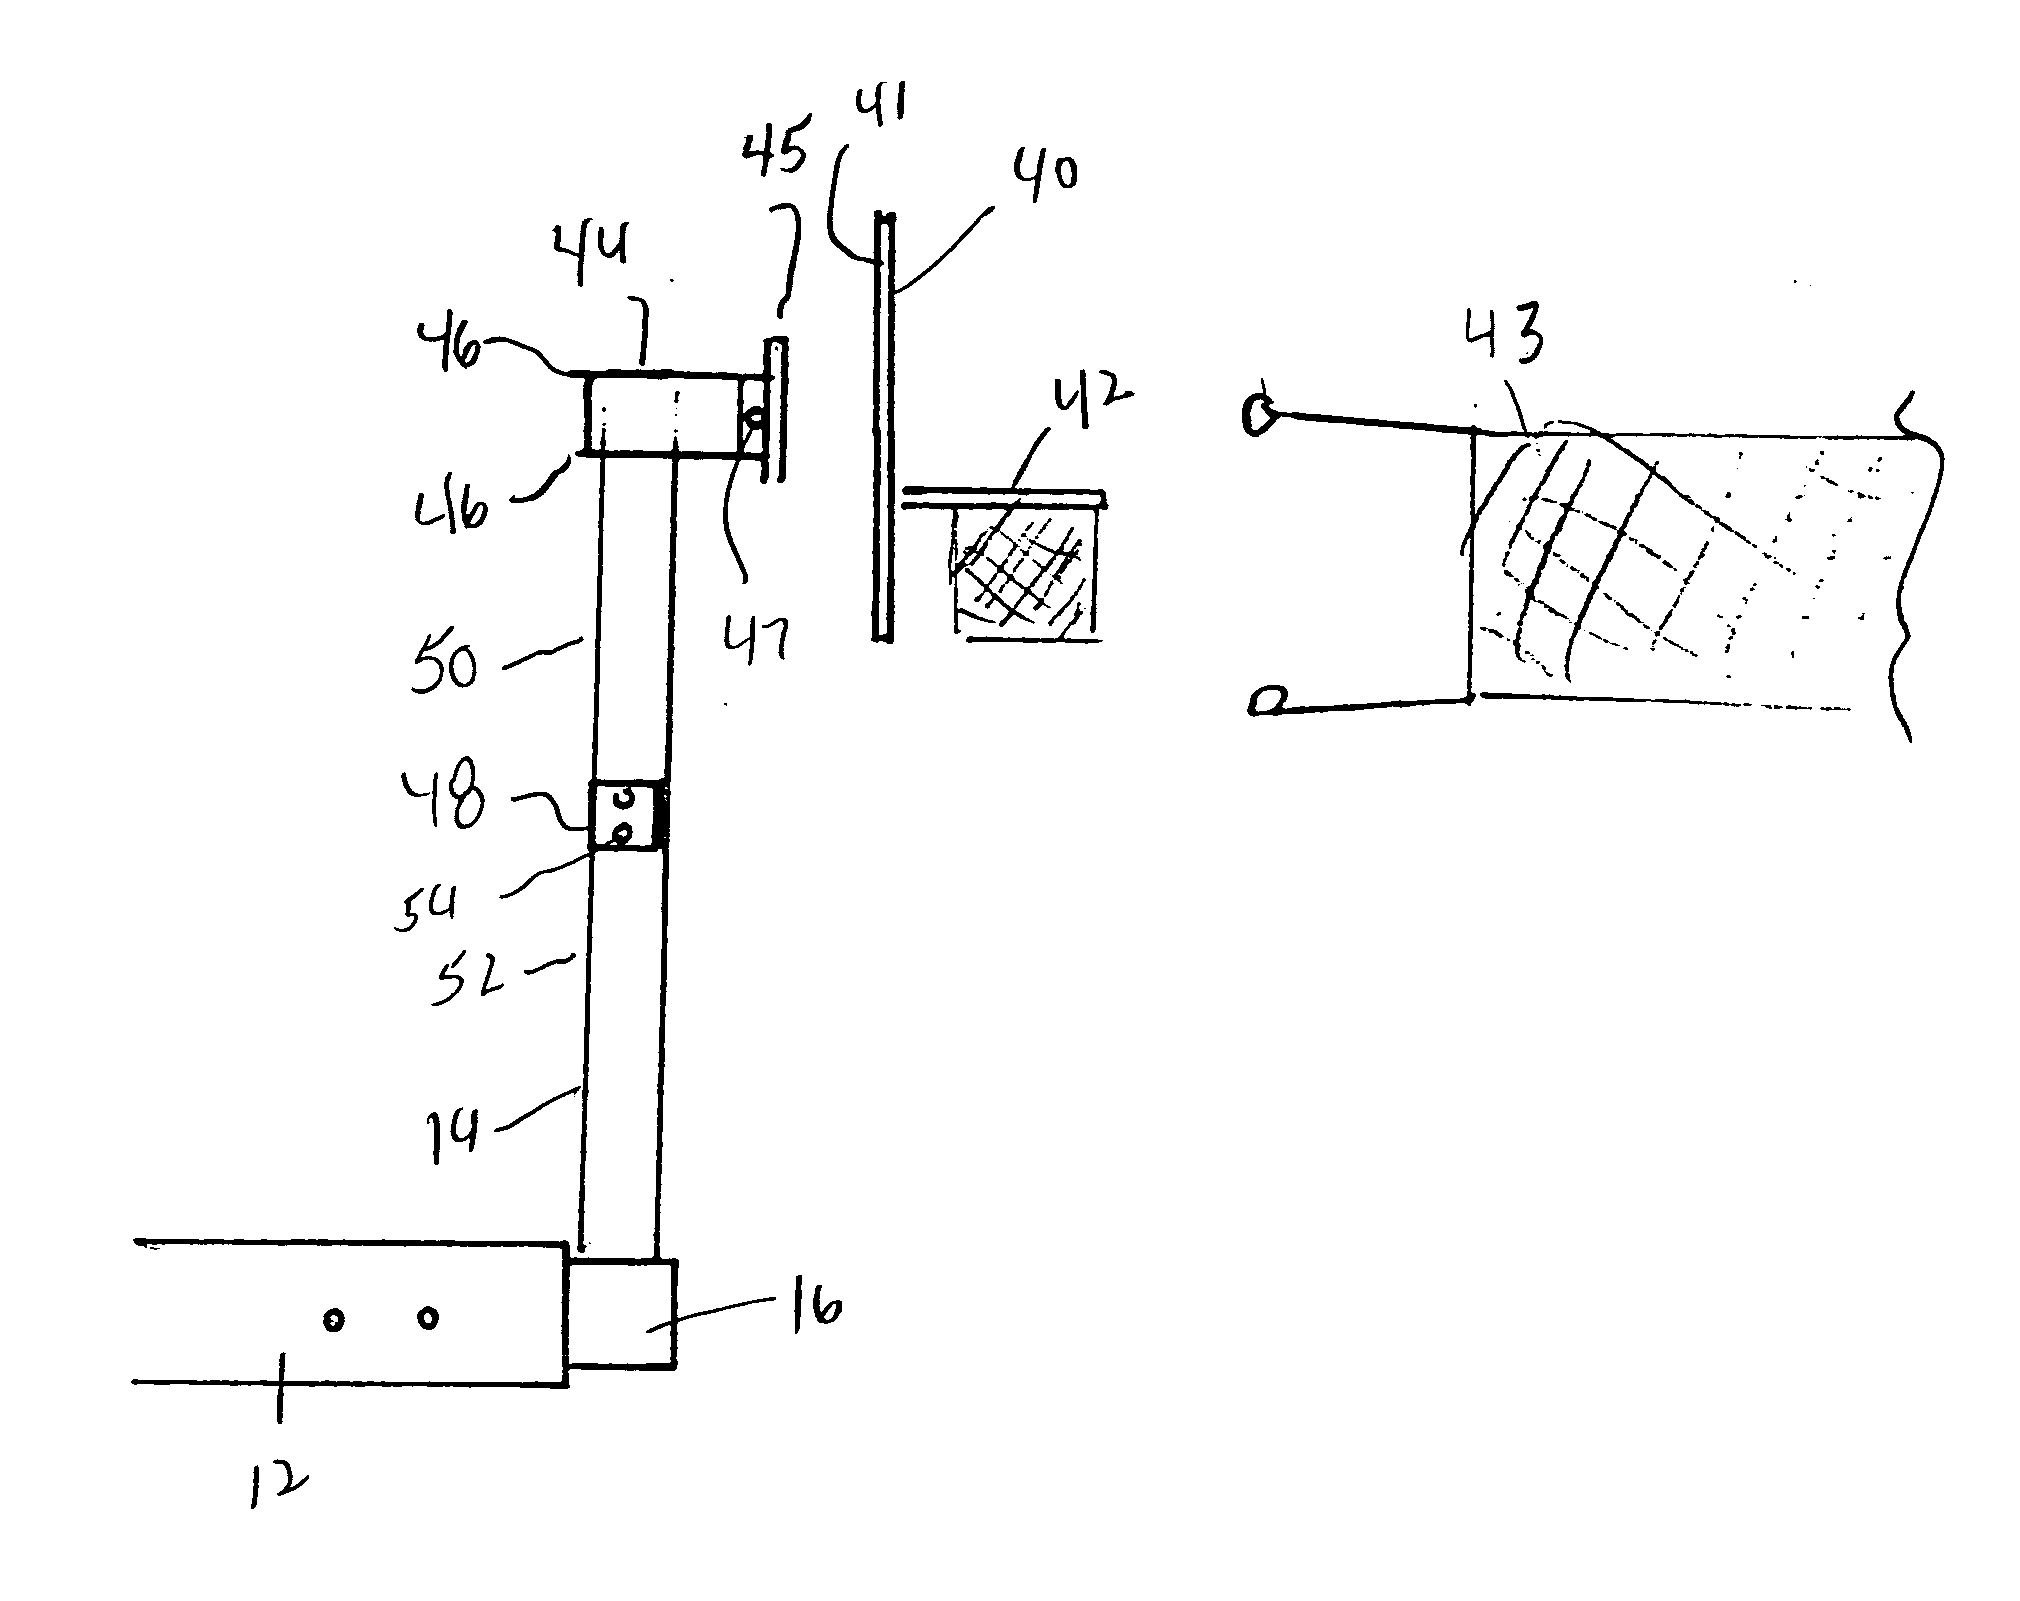 Trailer hitch assembly for support of a basketball backboard or net assembly